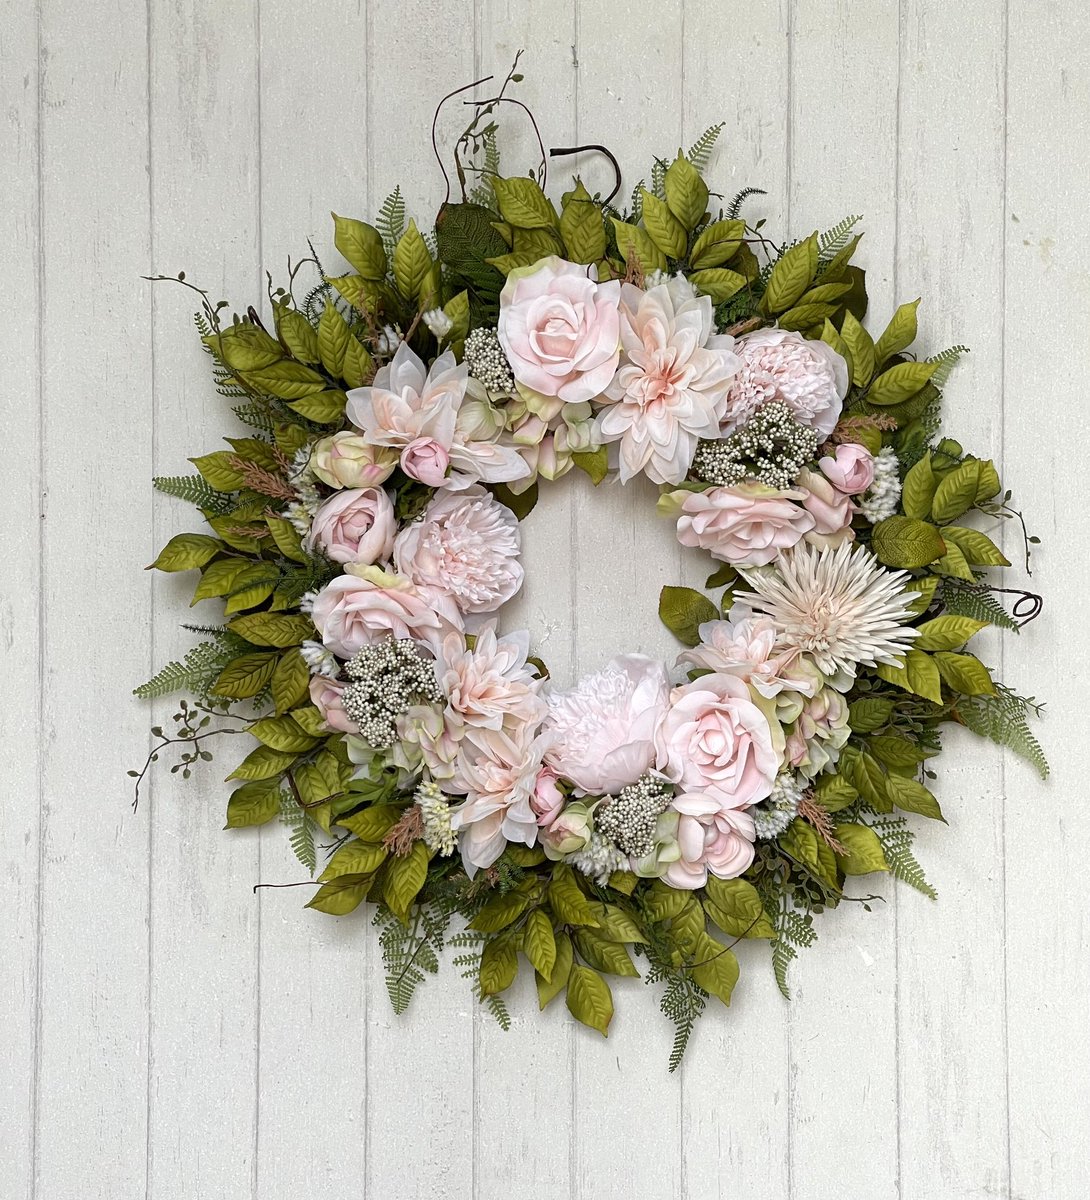 SPRING IS POPPING… and so will your front door💕 #beautiful #spring #wreaths #decor #Easter #MothersDay #giftsforher #ooak #pink #interiordecor #FarmhouseDecor #HappyBirthday #NewBeginnings #FlowersOfTwitter #flowergardengifts #floralart #FrontEnd